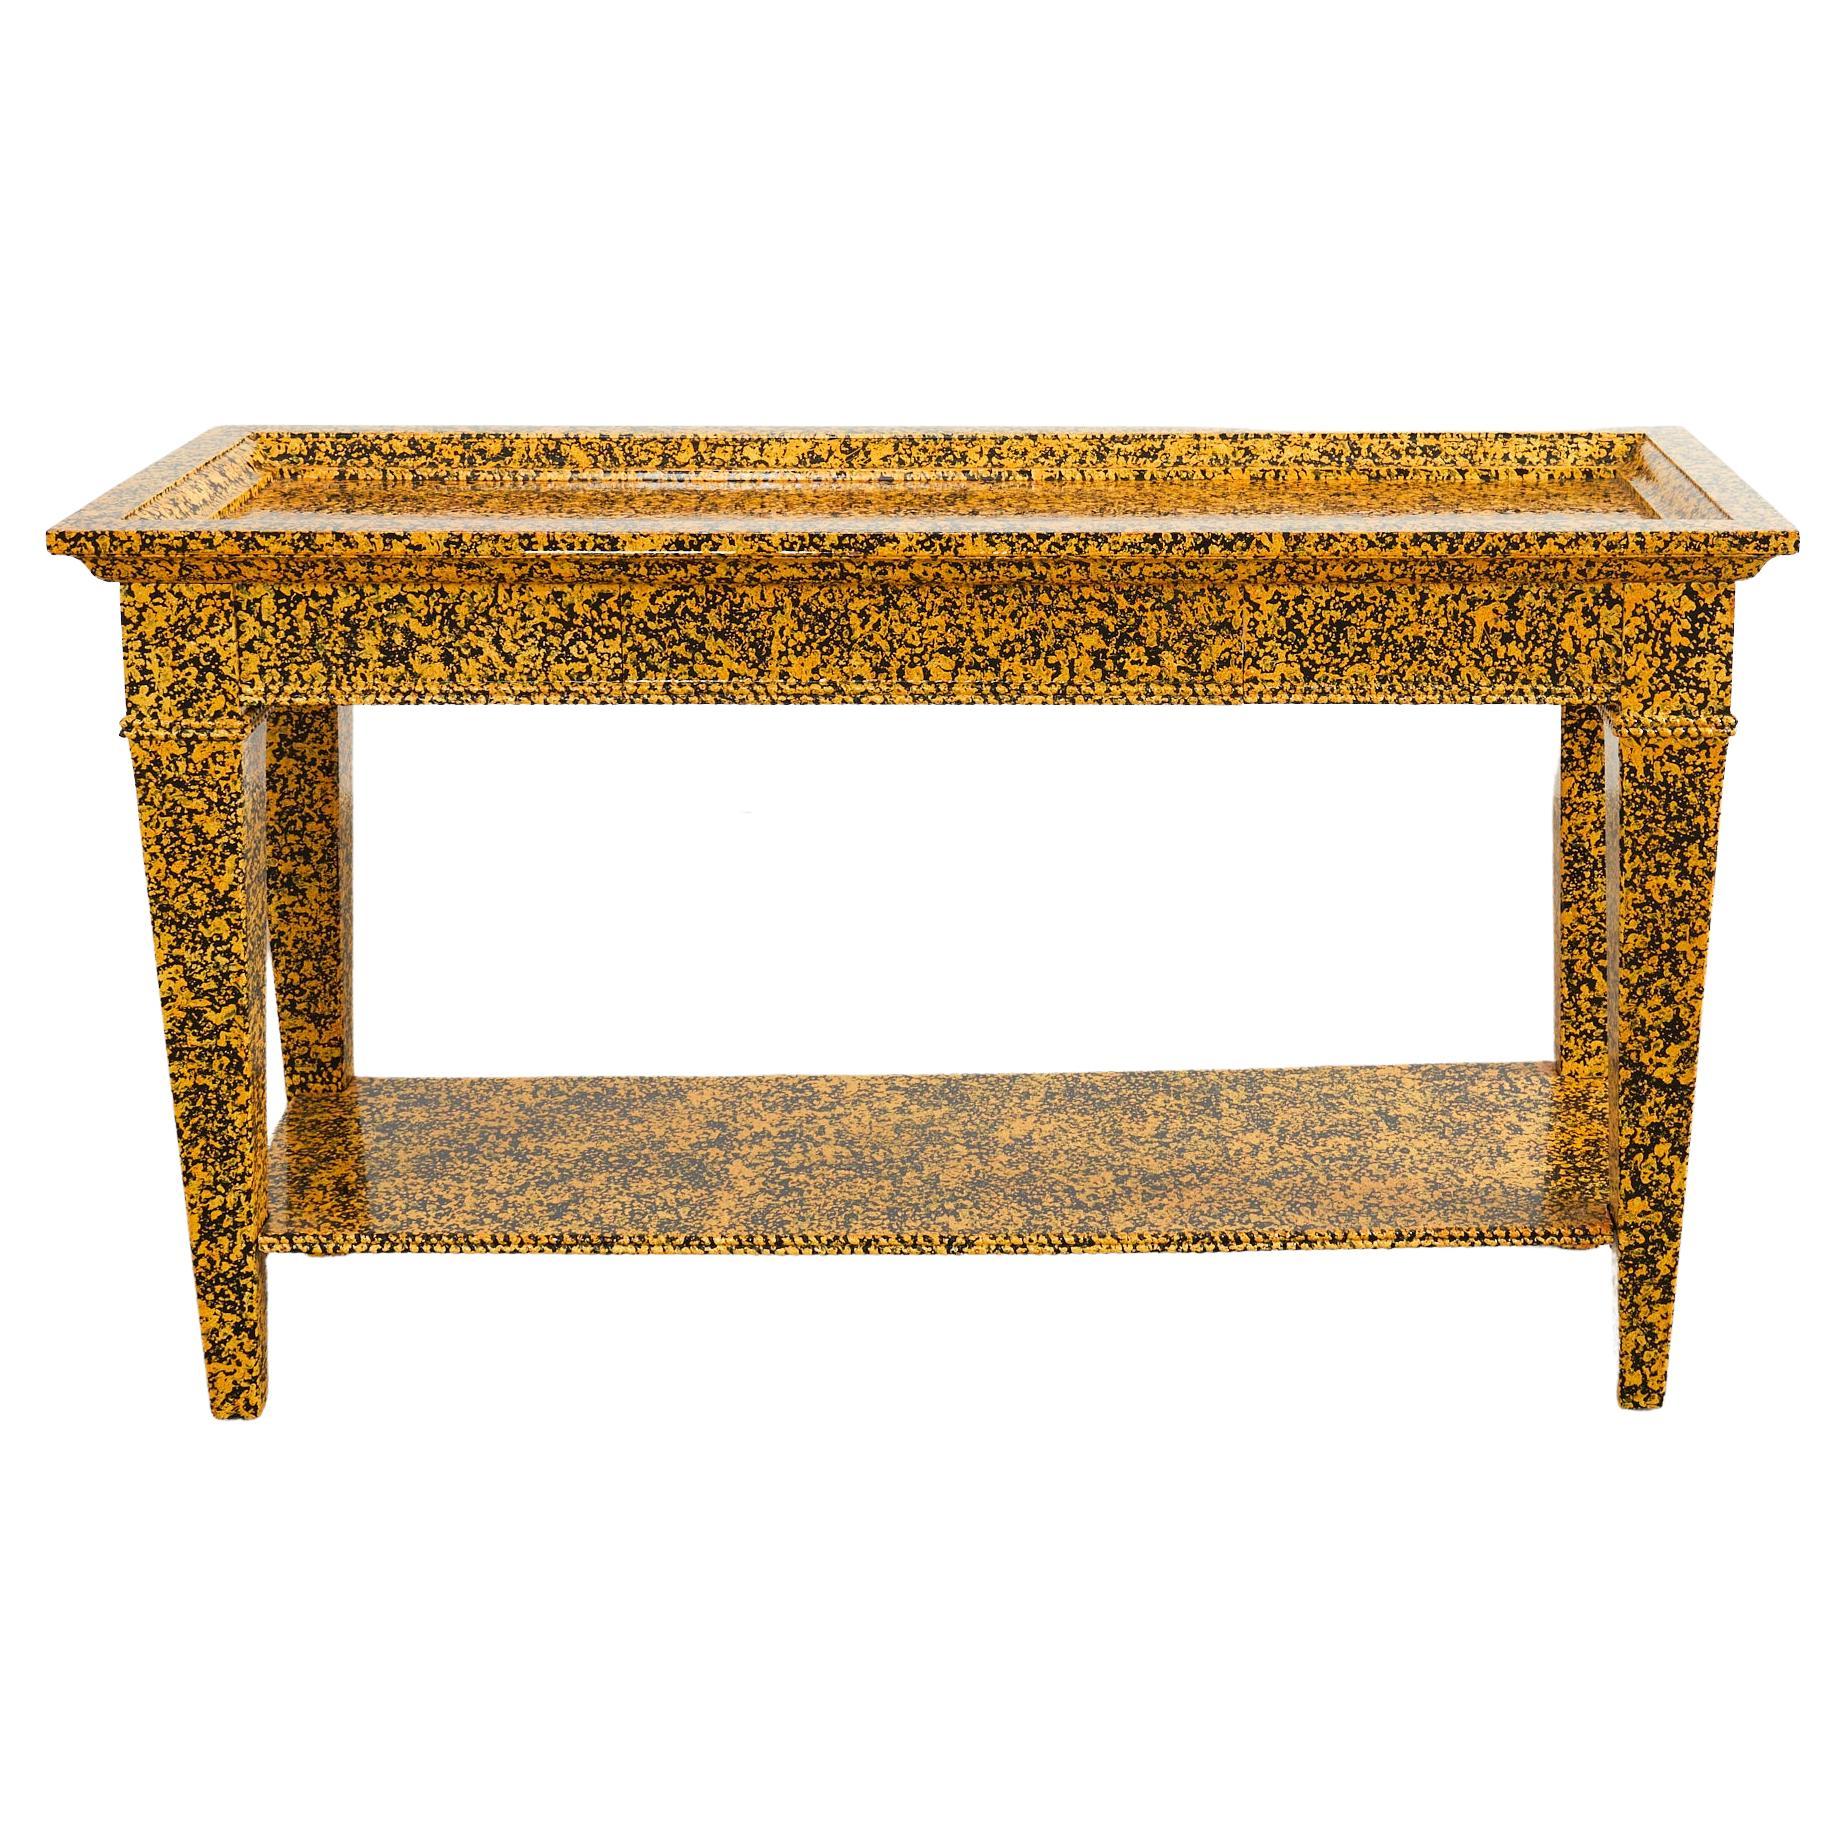 English Regency Style Two Tier Console Speckled by Ira Yeager For Sale